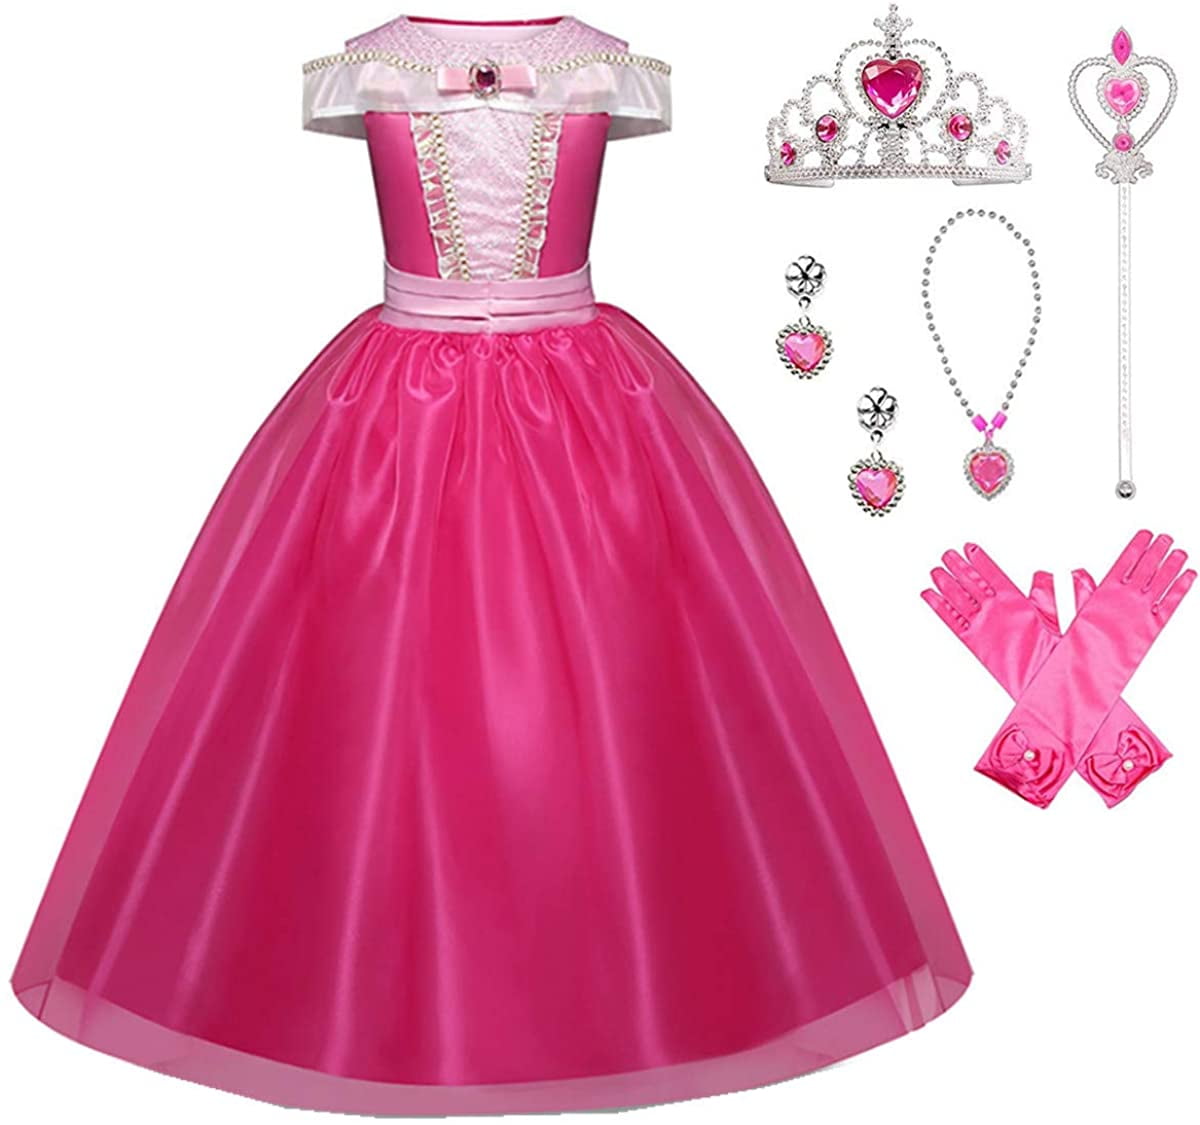 Gream Baby Princess Costumes Dress for Your Little Girls Party Dress up 